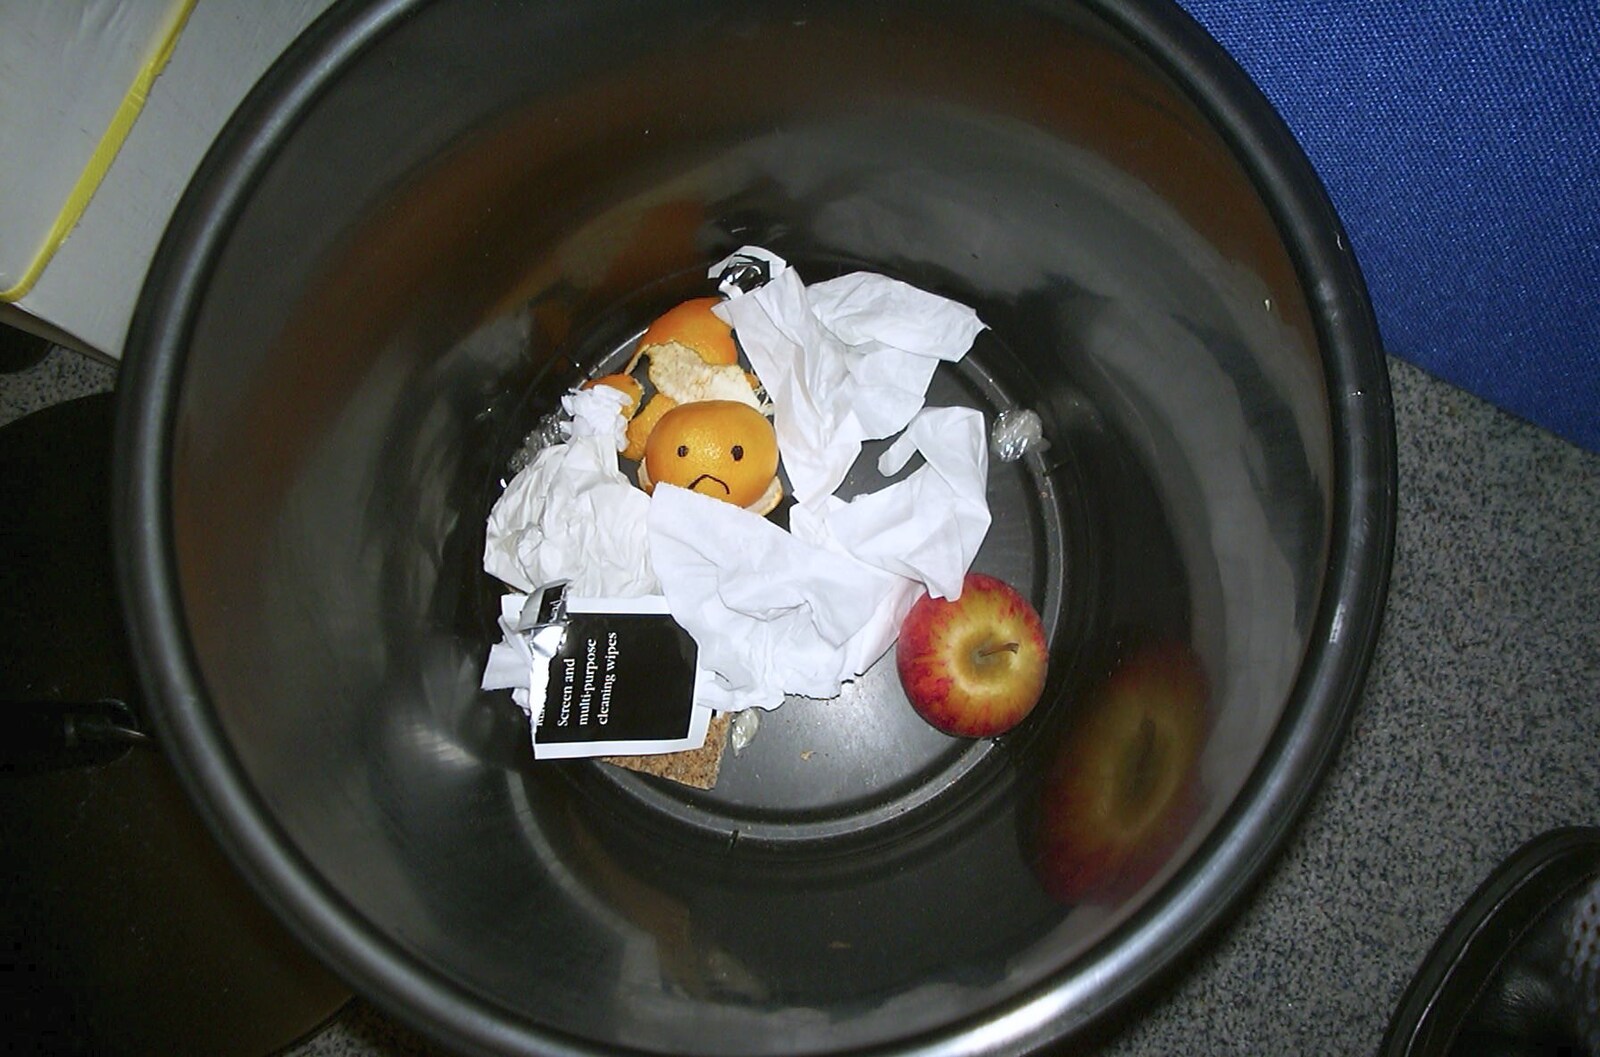 There's a sad tangerine in the bin at work from A BSCC Barbeque and Bill's 3G Lab Party, Papworth Everard, Cambridgeshire - 1st June 2001